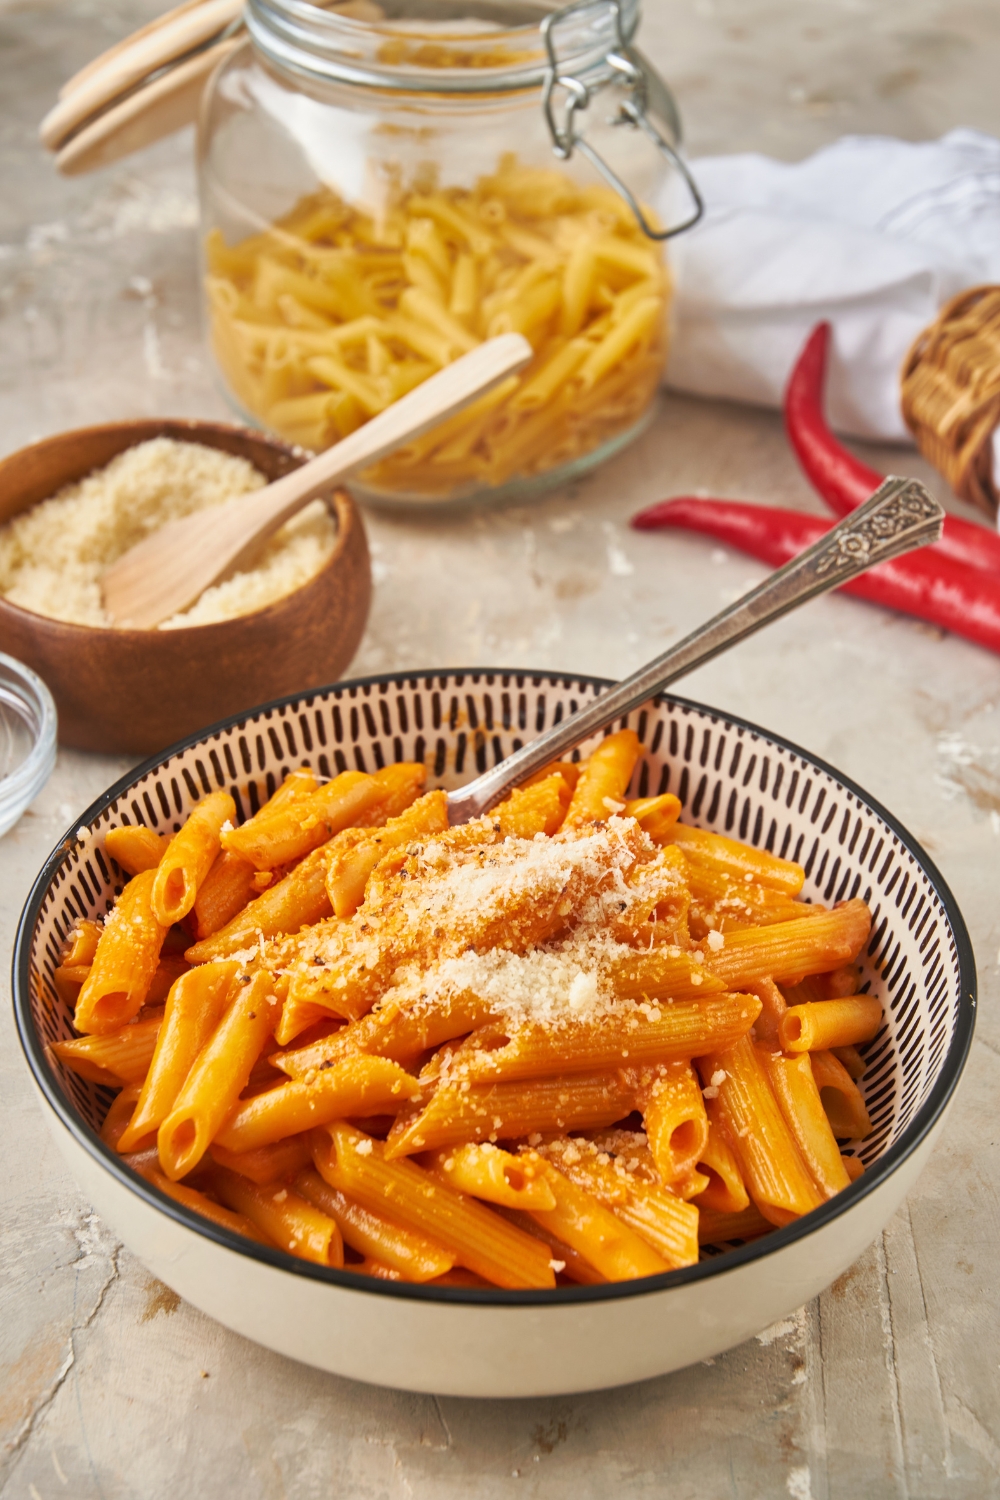 A bowl of Carbone spicy rigatoni garnished with grated parmesan cheese and in the background is a jar of dried pasta and a bowl of parmesan cheese with a spoon in it.